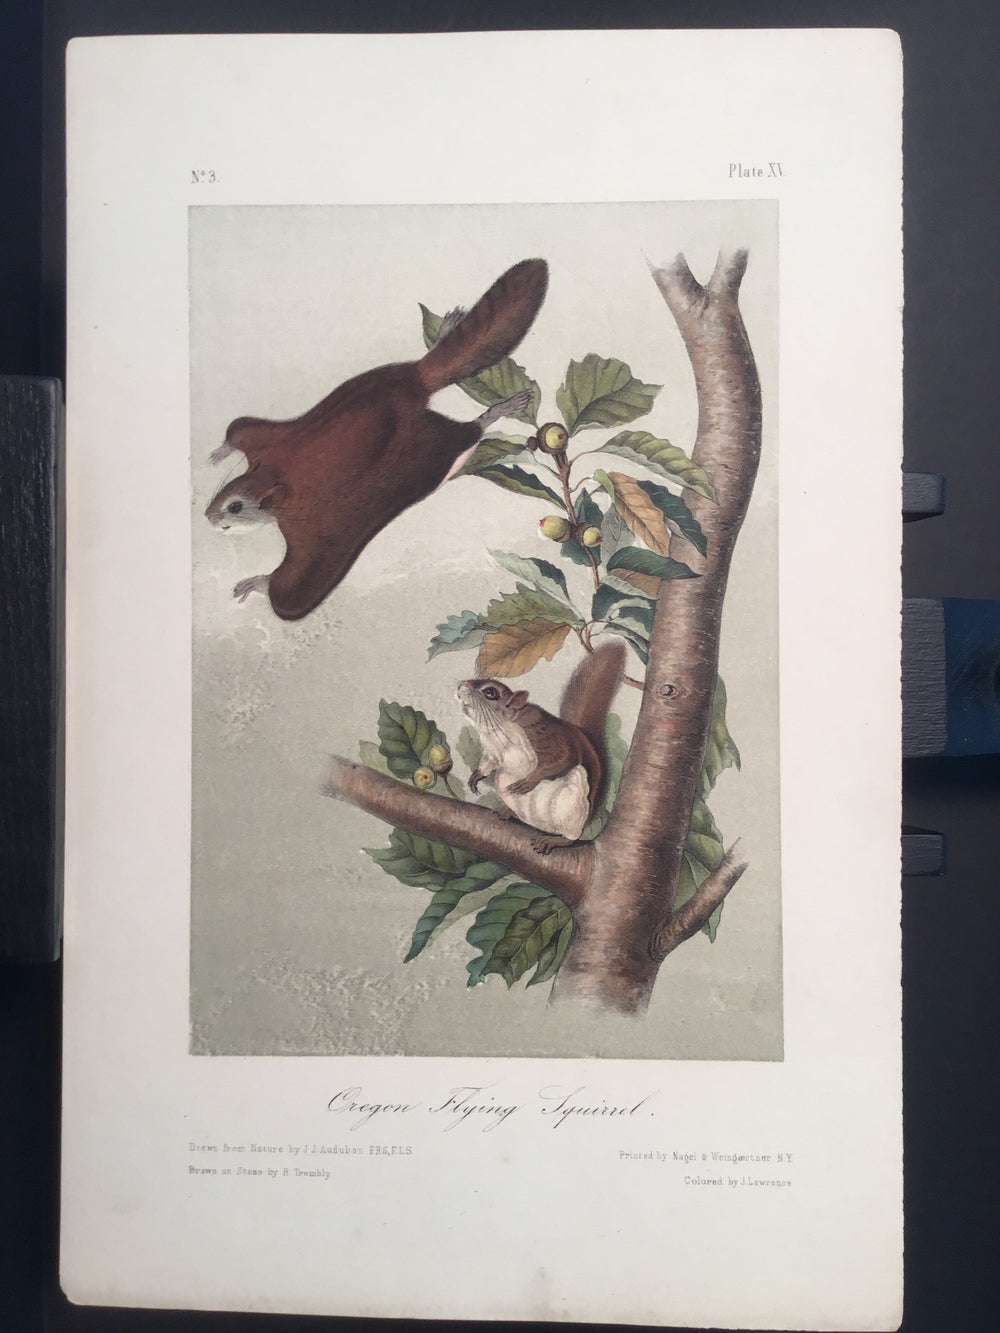 Lord-Hopkins Collection - Oregon Flying Squirrel